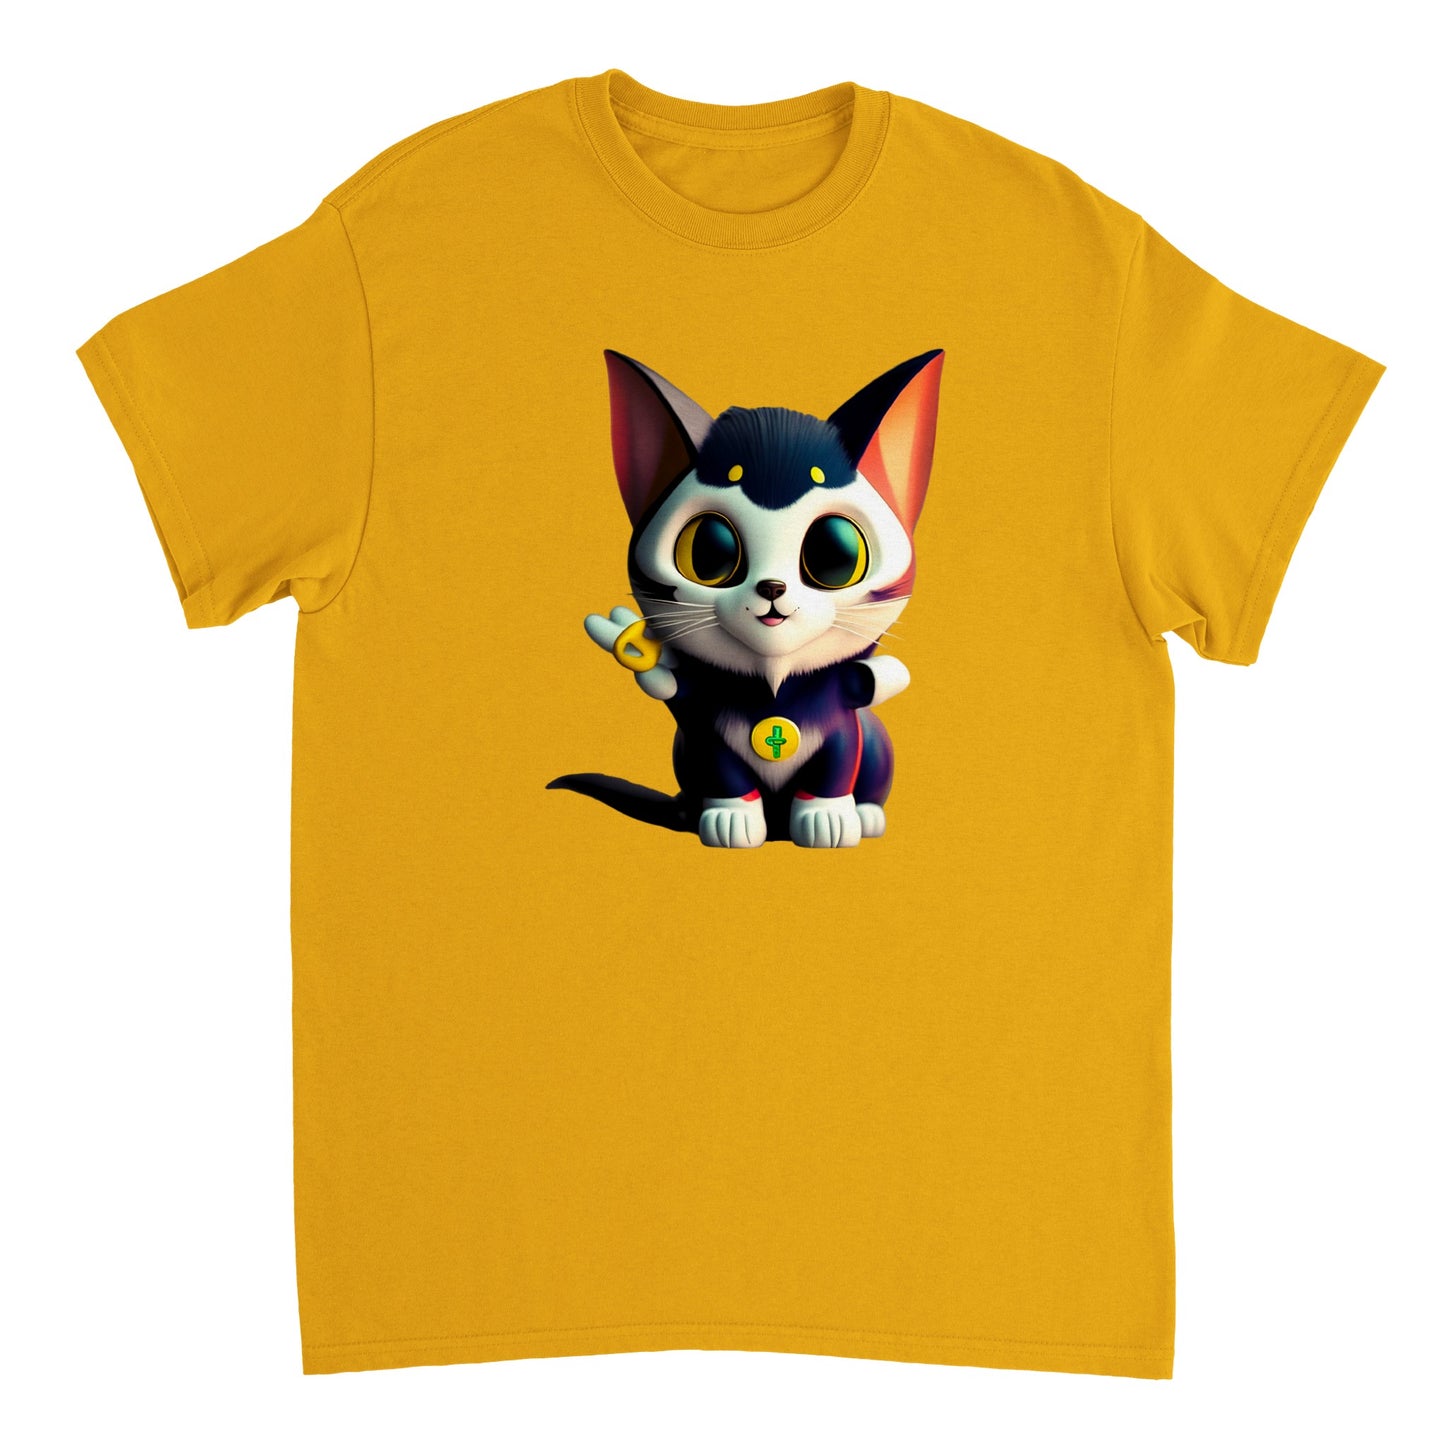 Adorable, Cool, Cute Cats and Kittens Toy - Heavyweight Unisex Crewneck T-shirt 56